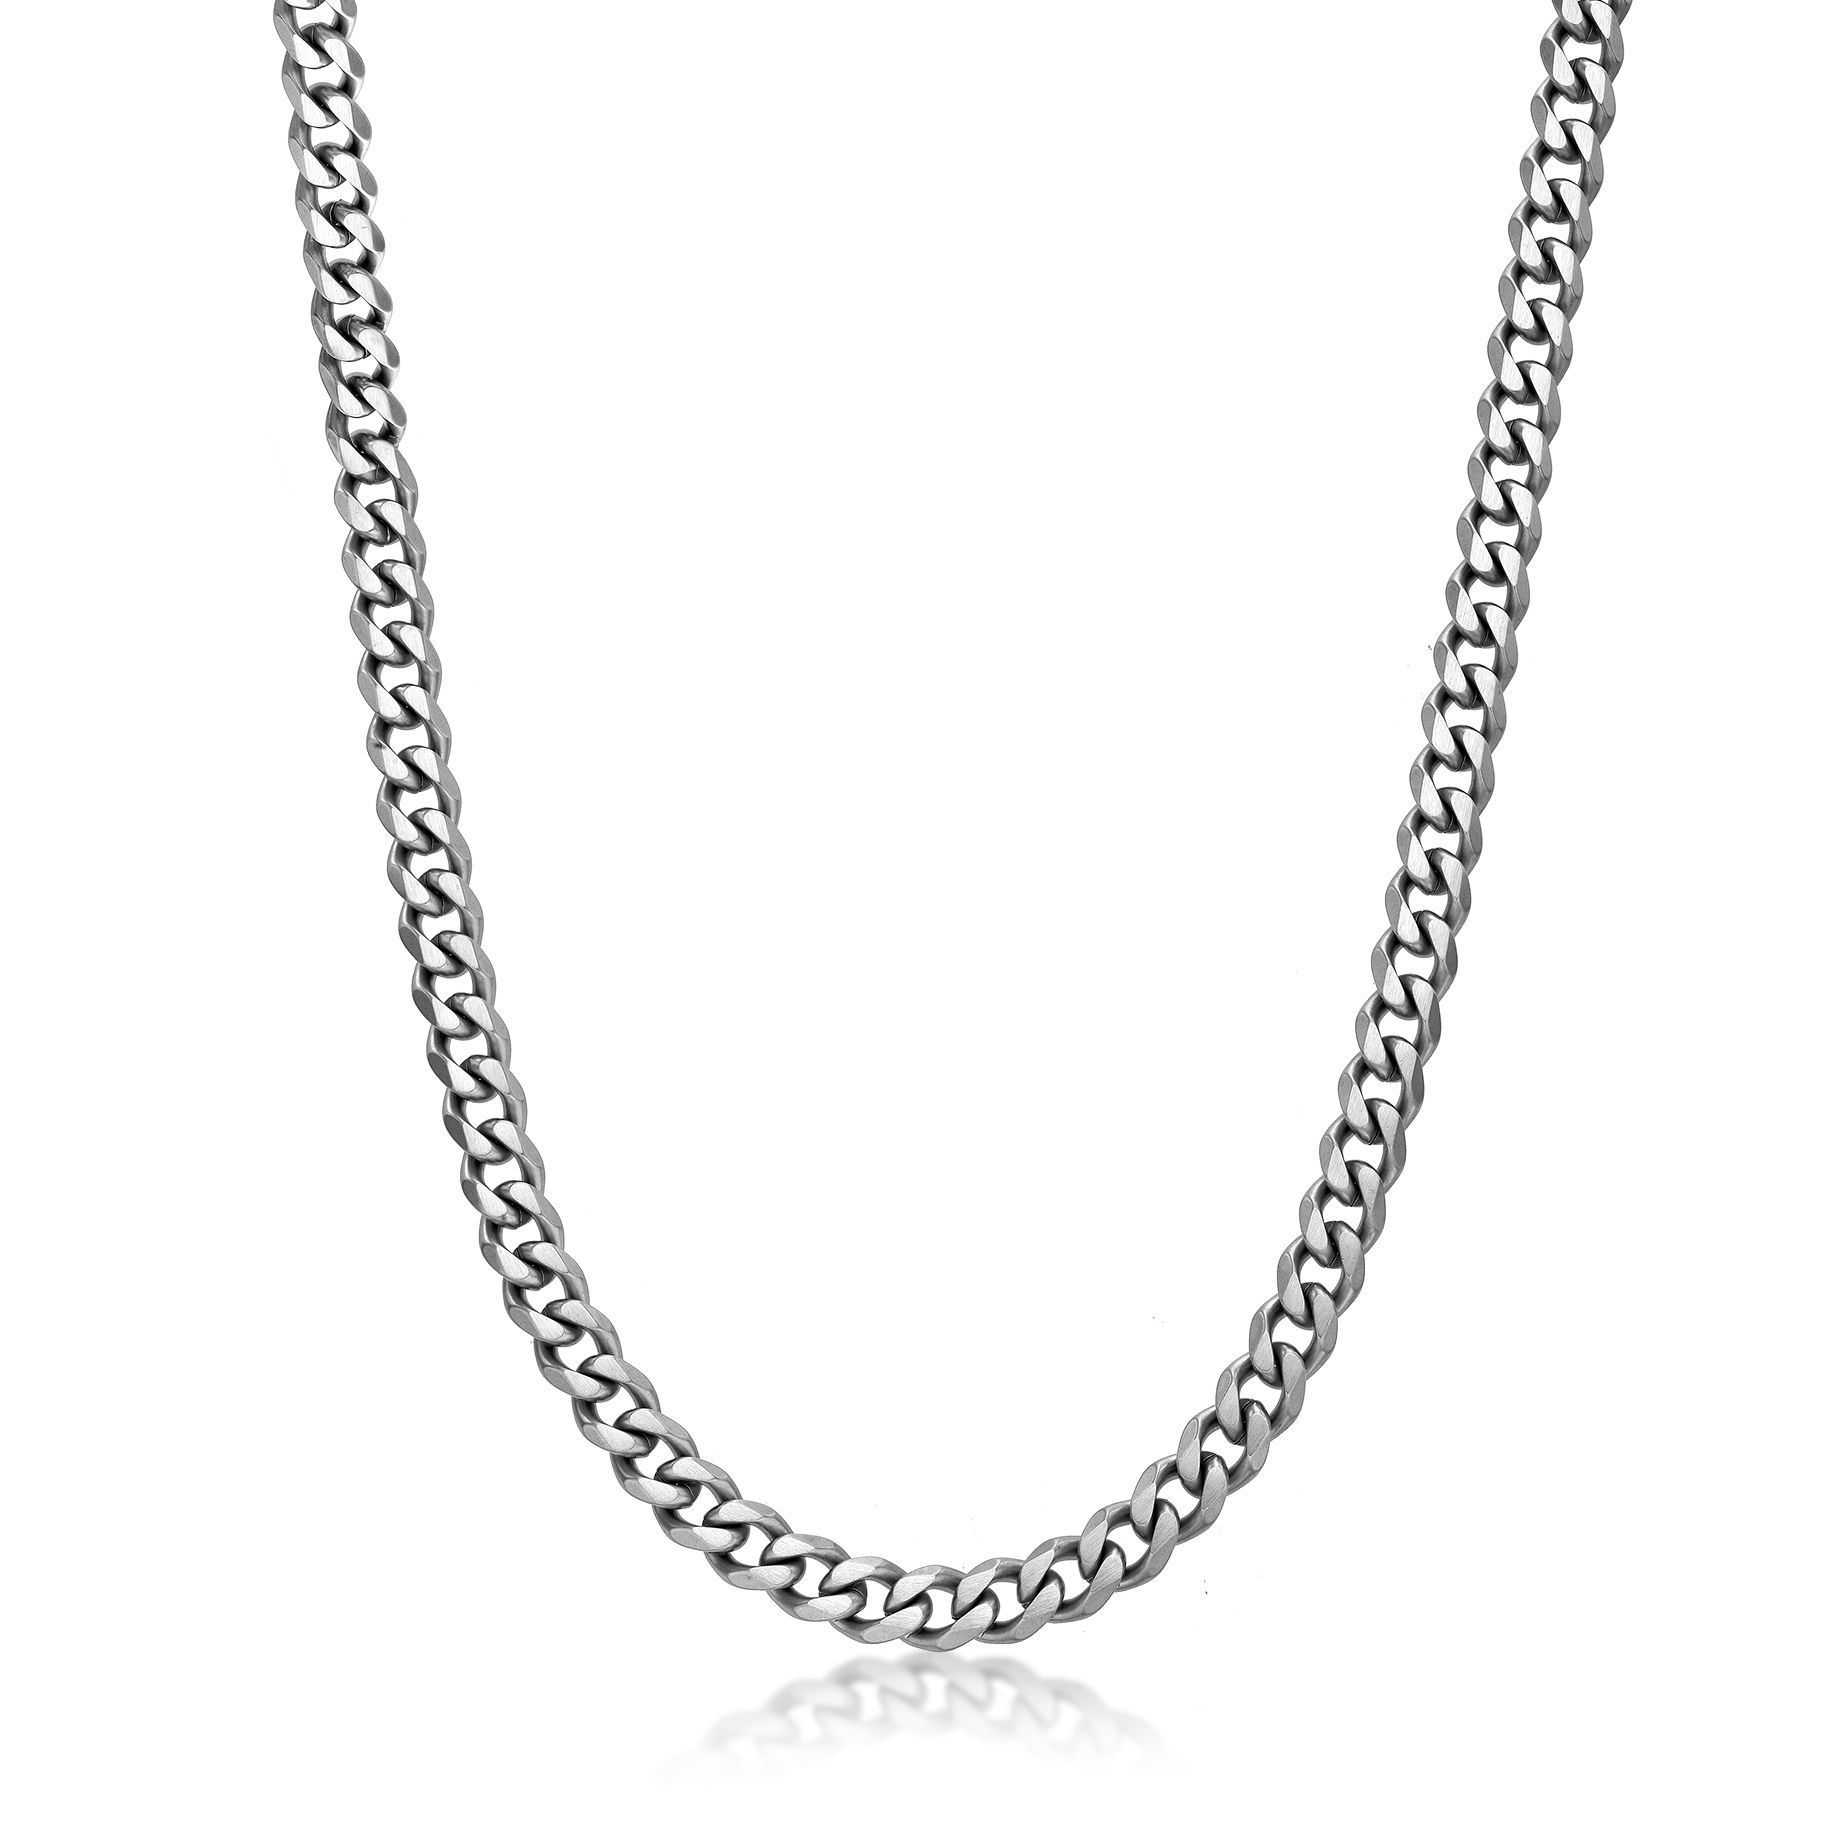 Men's Stainless Steel Two Tone 8MM Curb Chain Necklace - 22 Inch | Metro Jewelry